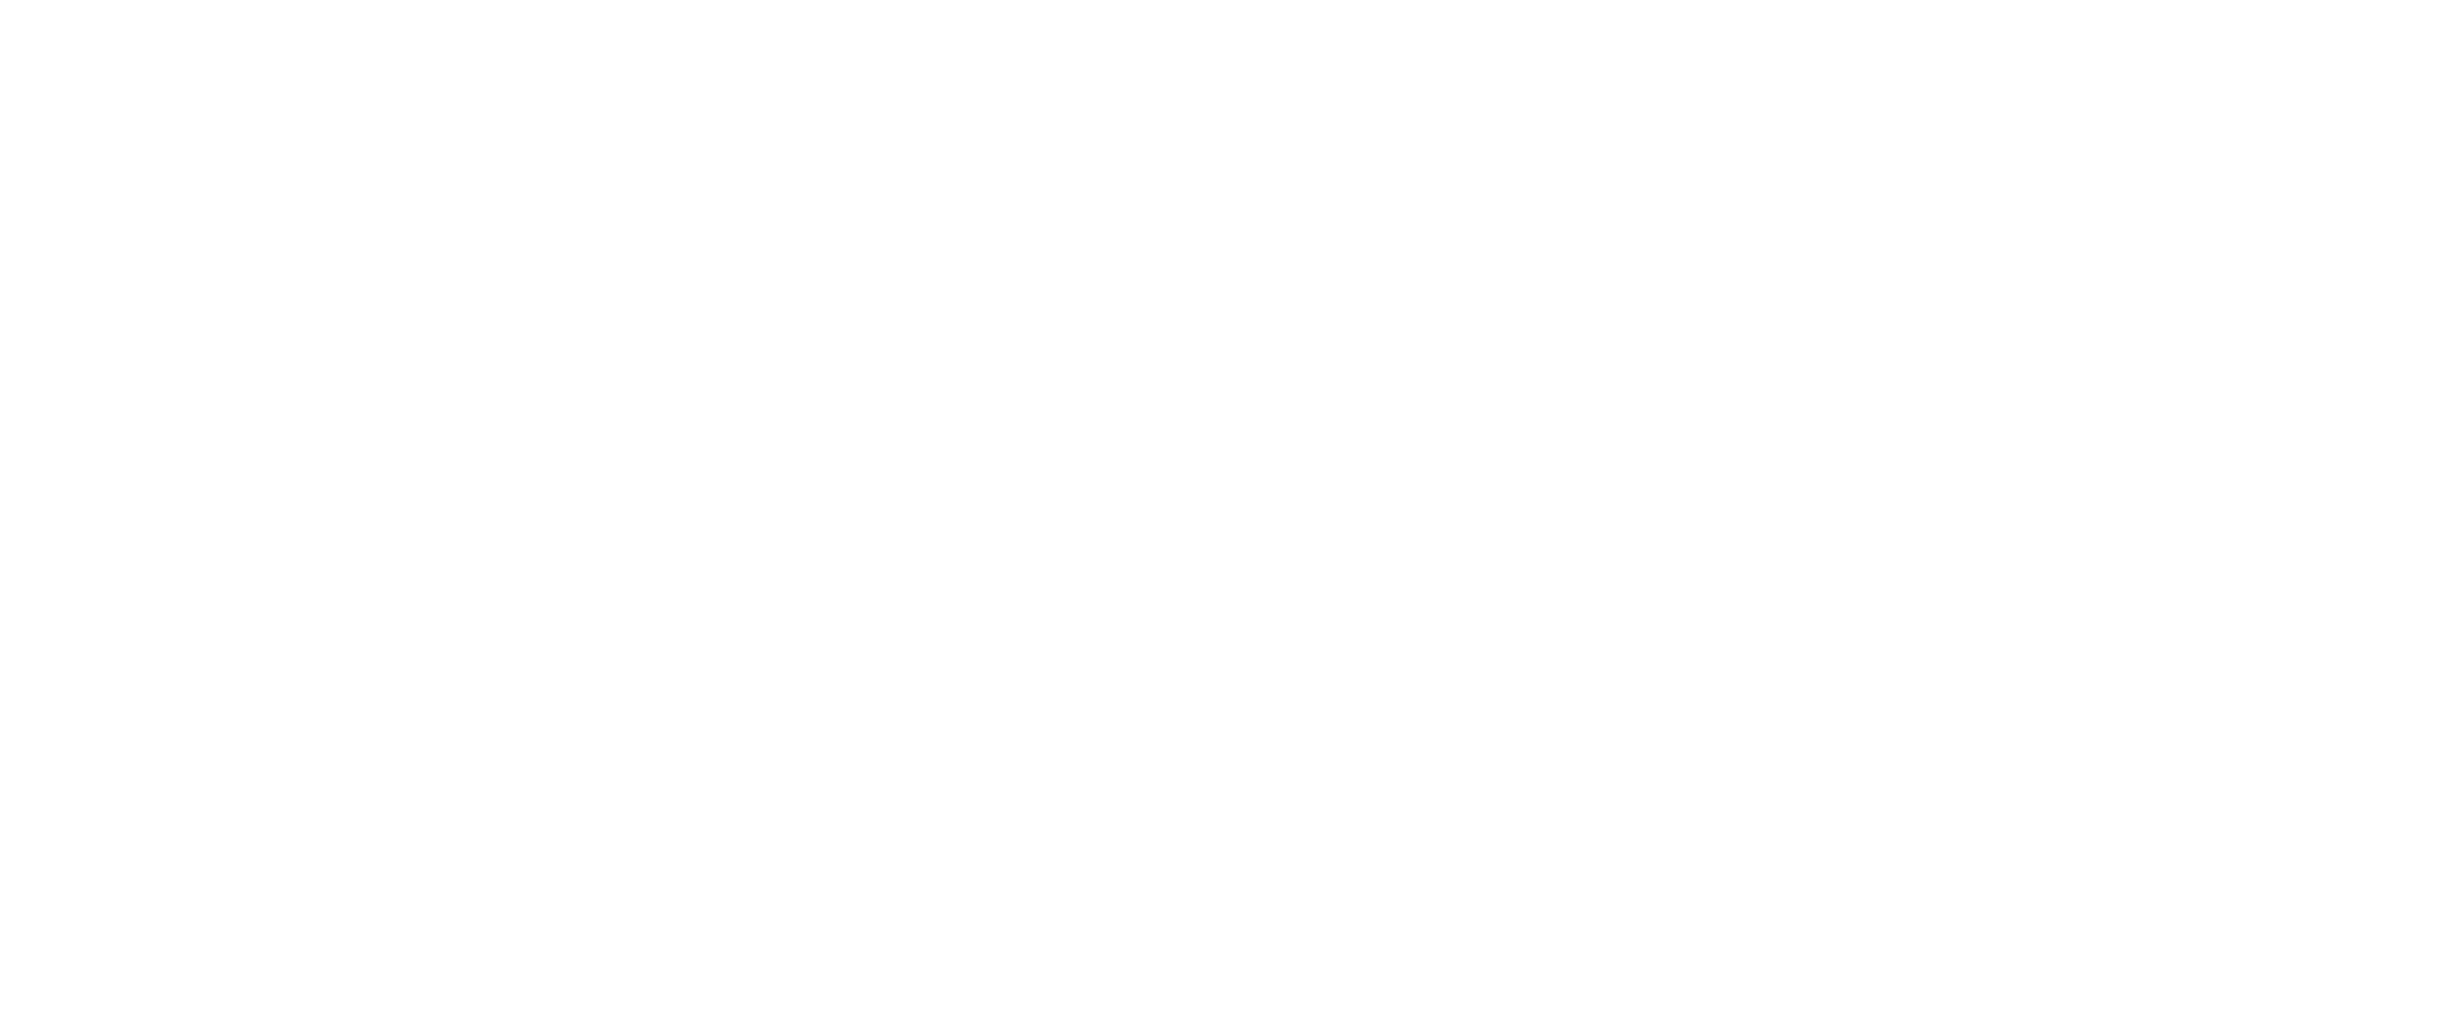 I Love You, and It Hurts logo